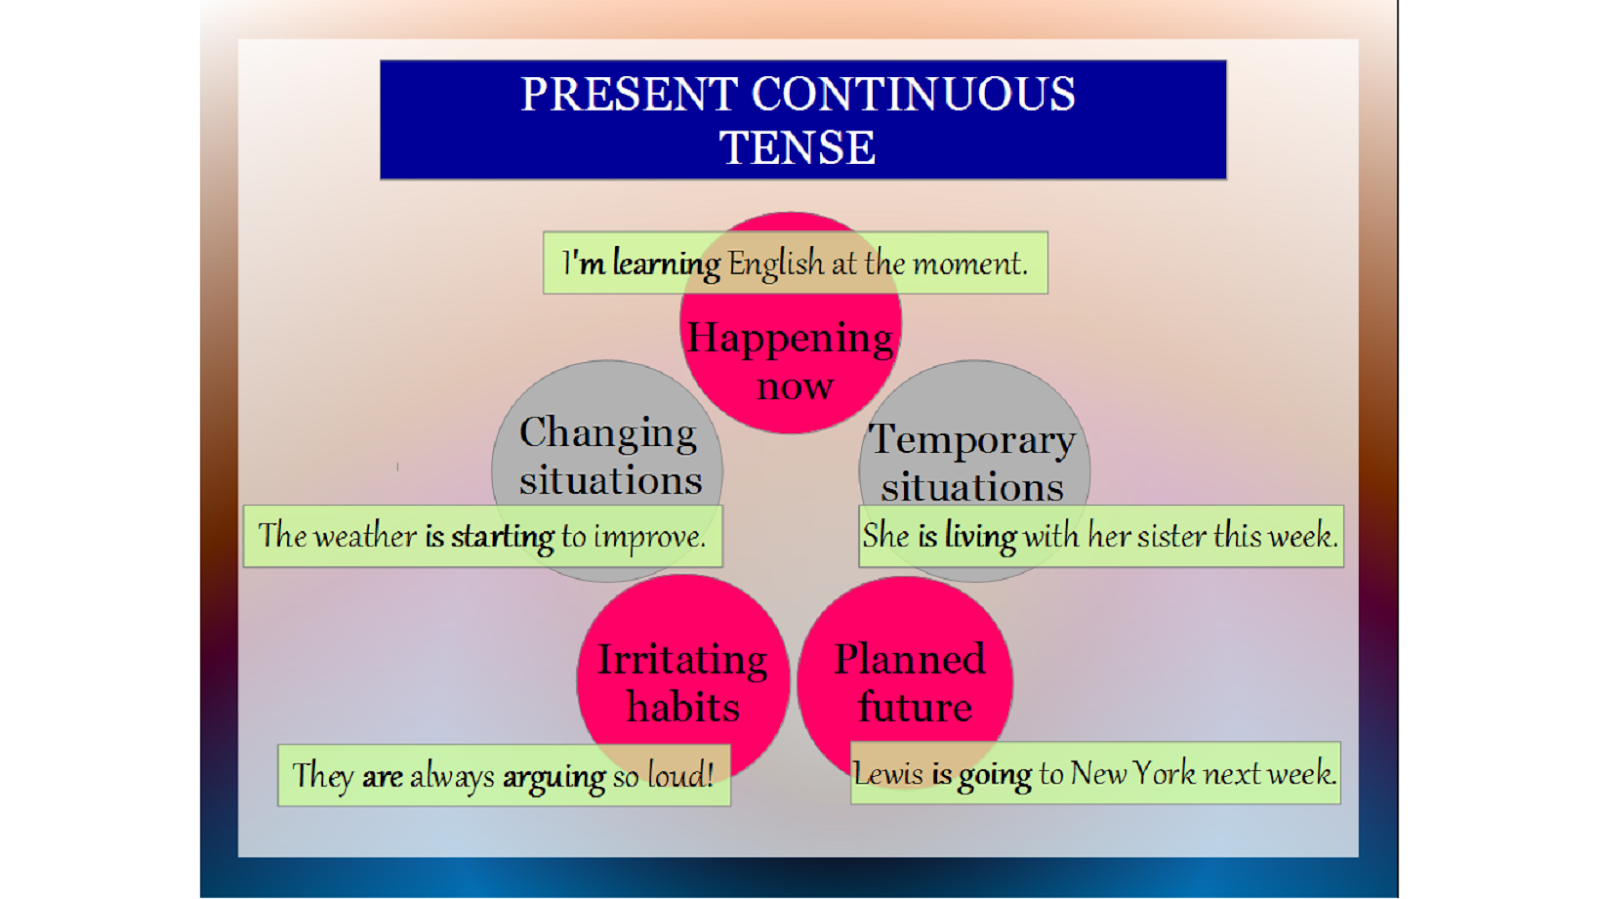 Present continuous weather. Презент континиус. Past Continuous situations. Present Continuous инфографика. Present Continuous situations.